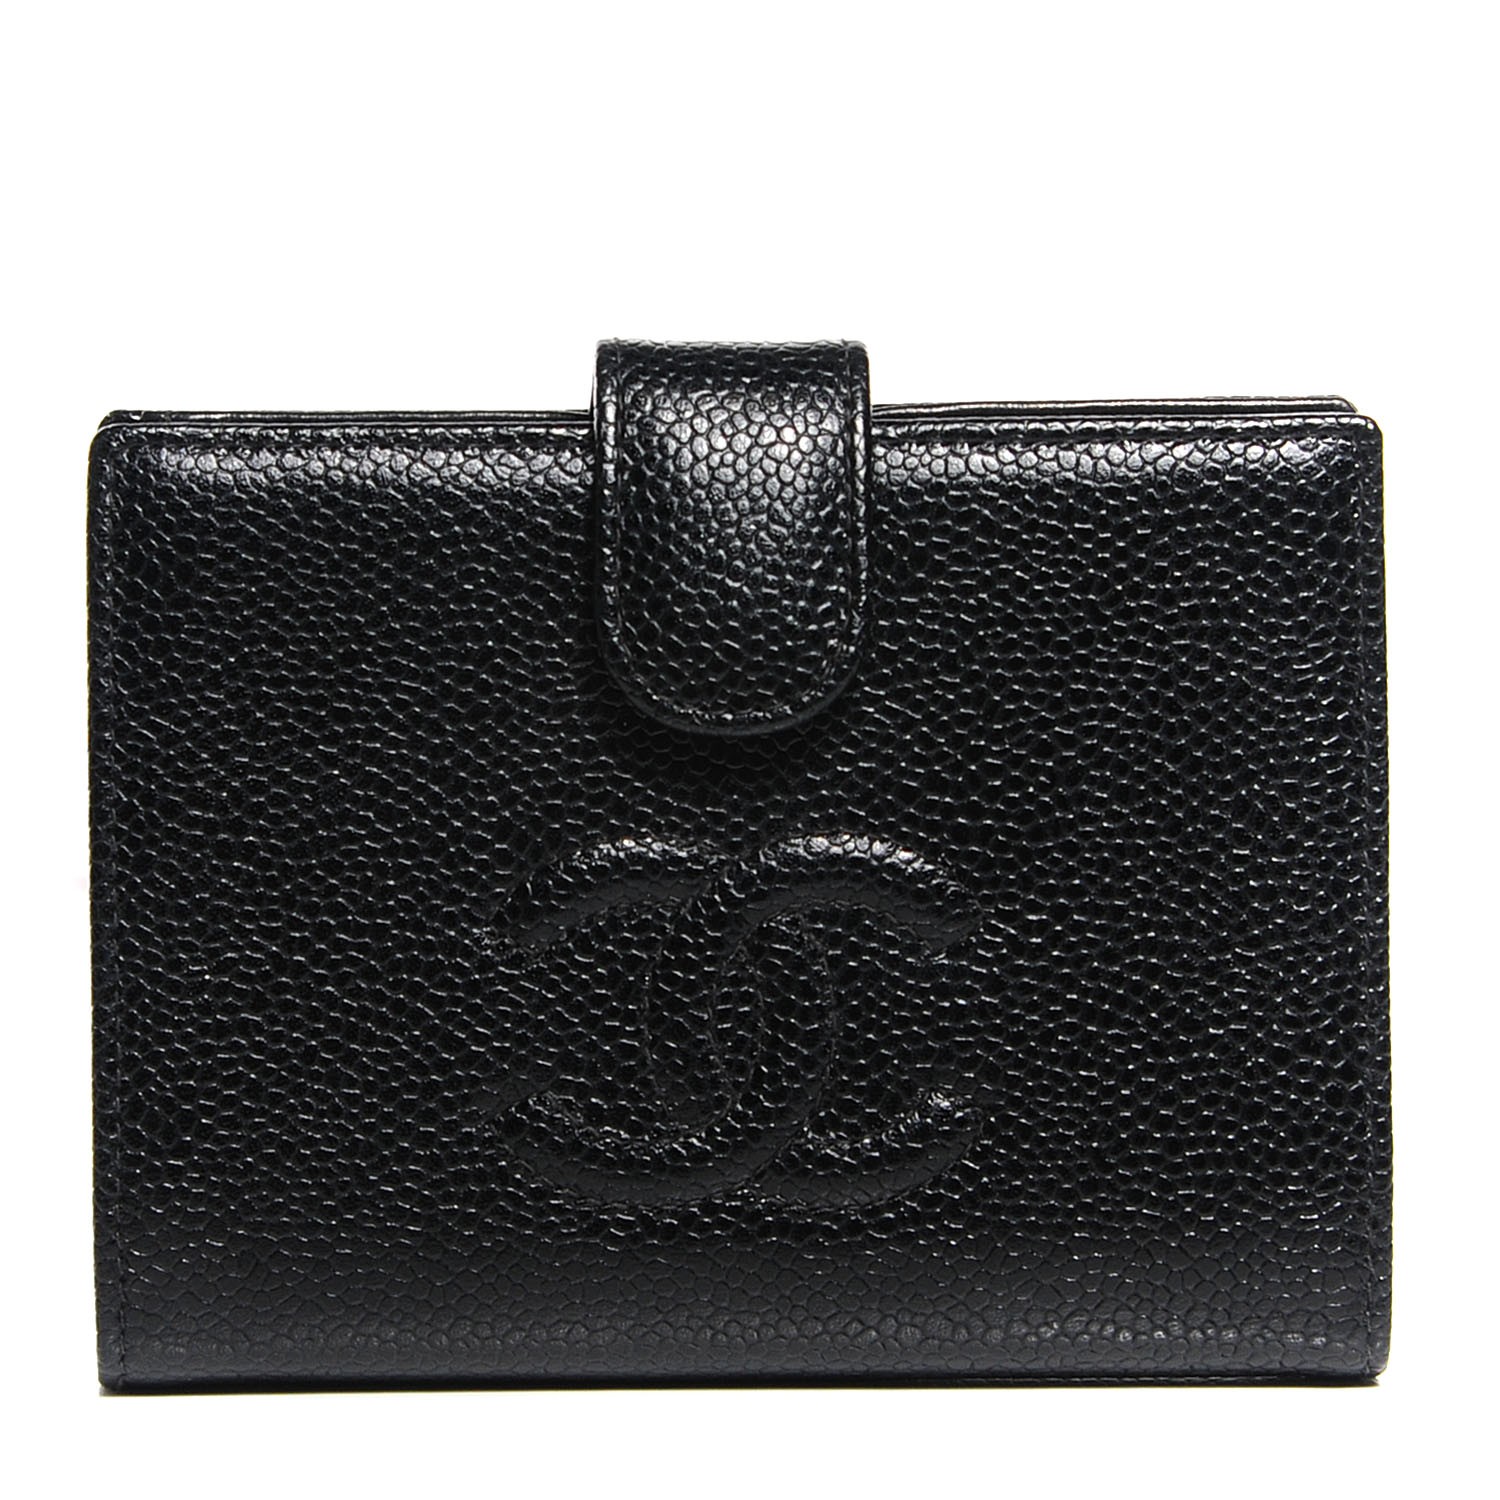 CHANEL Caviar Timeless CC Compact French Wallet Black 110326